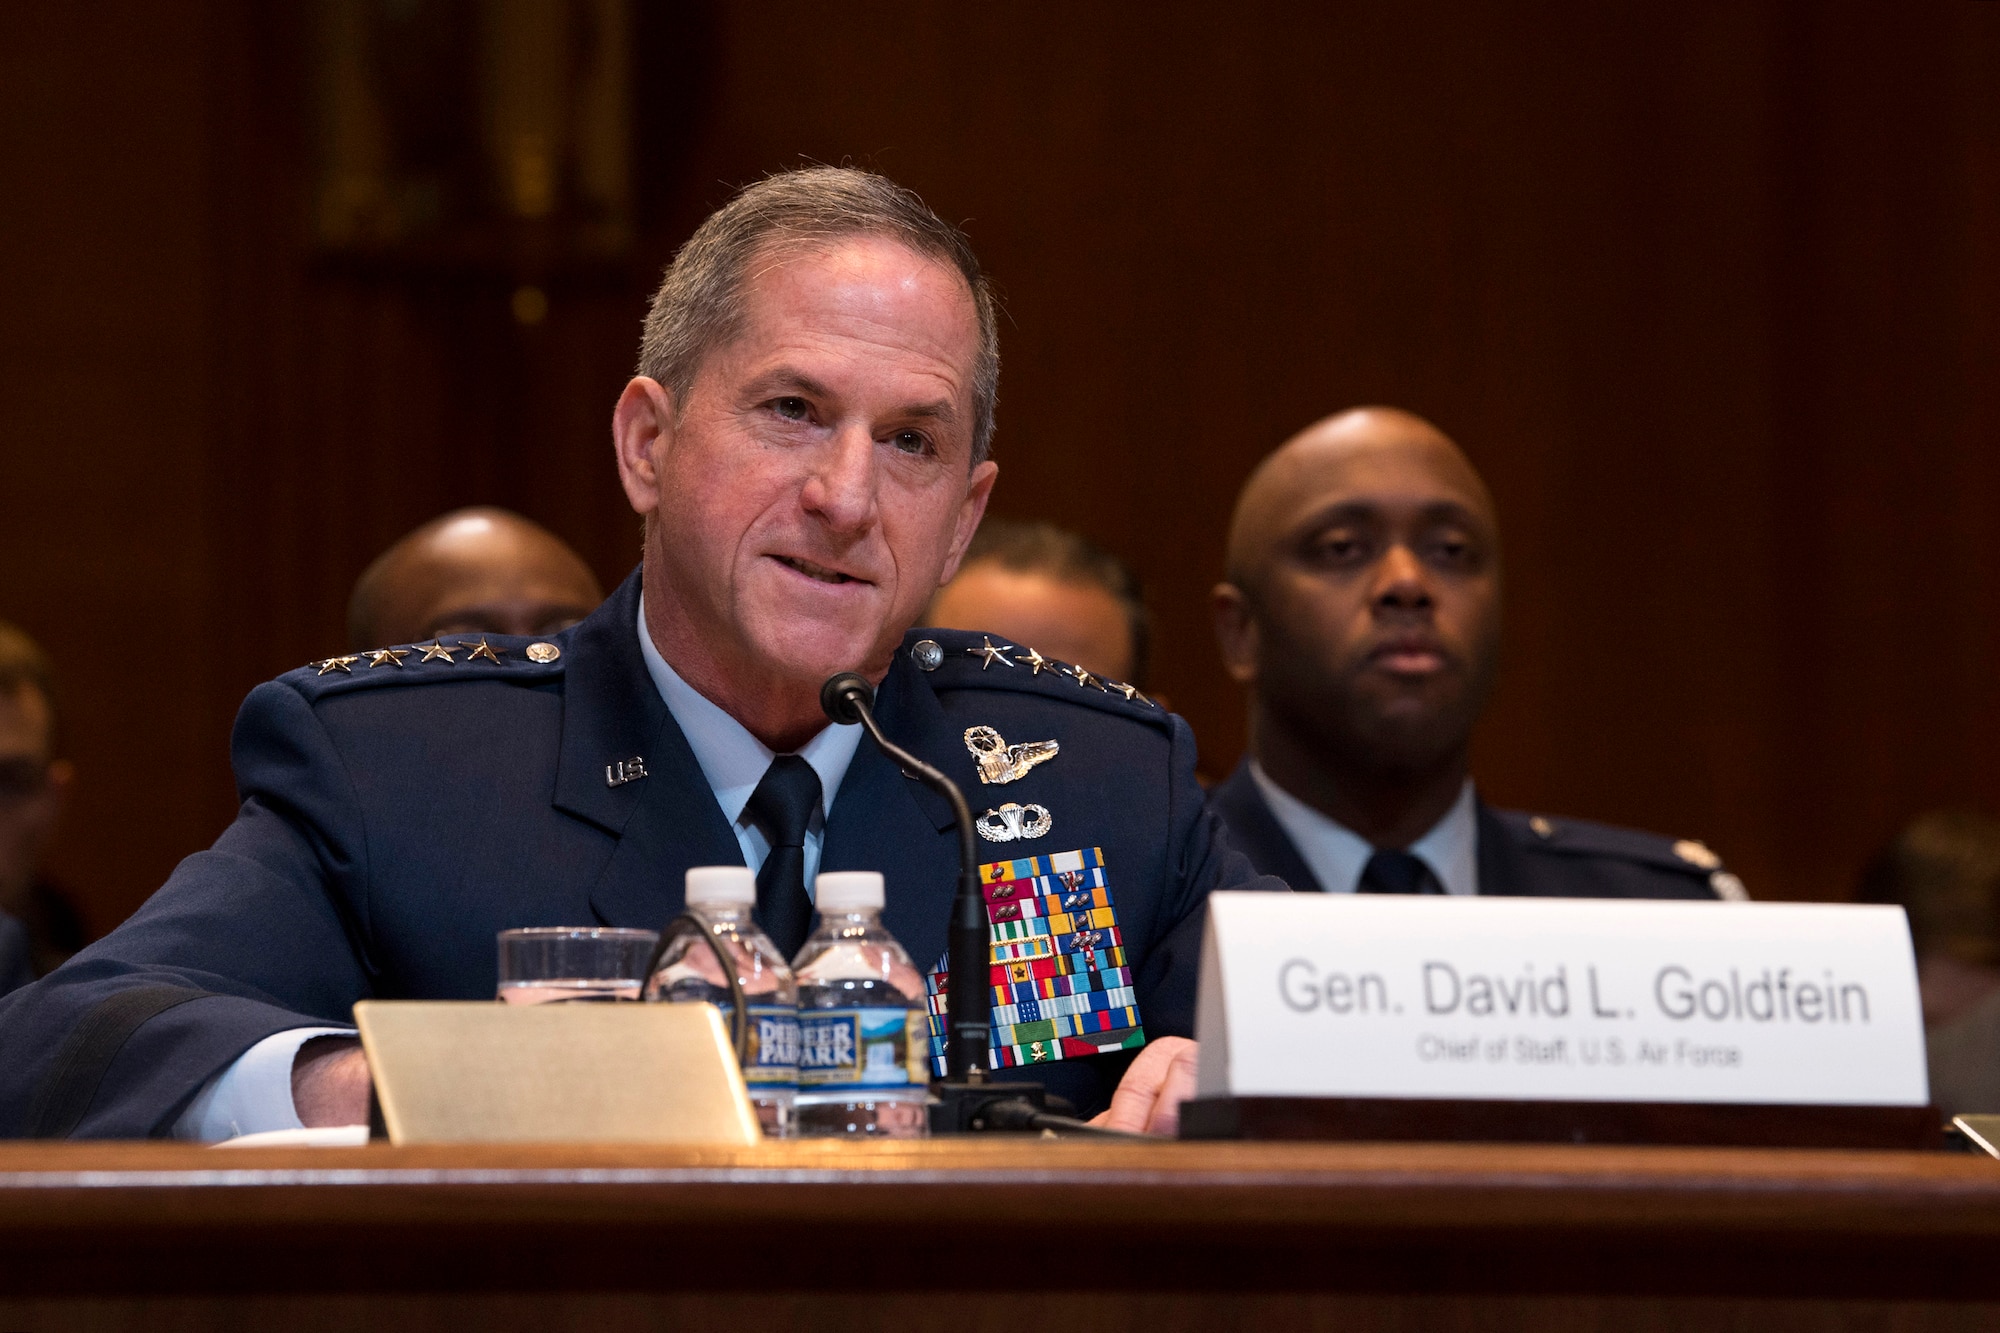 Air Force Chief of Staff Gen. David L. Goldfein testifies during a Senate Appropriations Committee hearing on the fiscal year 2020 funding request and budget justification for the Department of the Air Force in Washington, D.C., March 13, 2019. (U.S. Air Force photo by Adrian Cadiz)